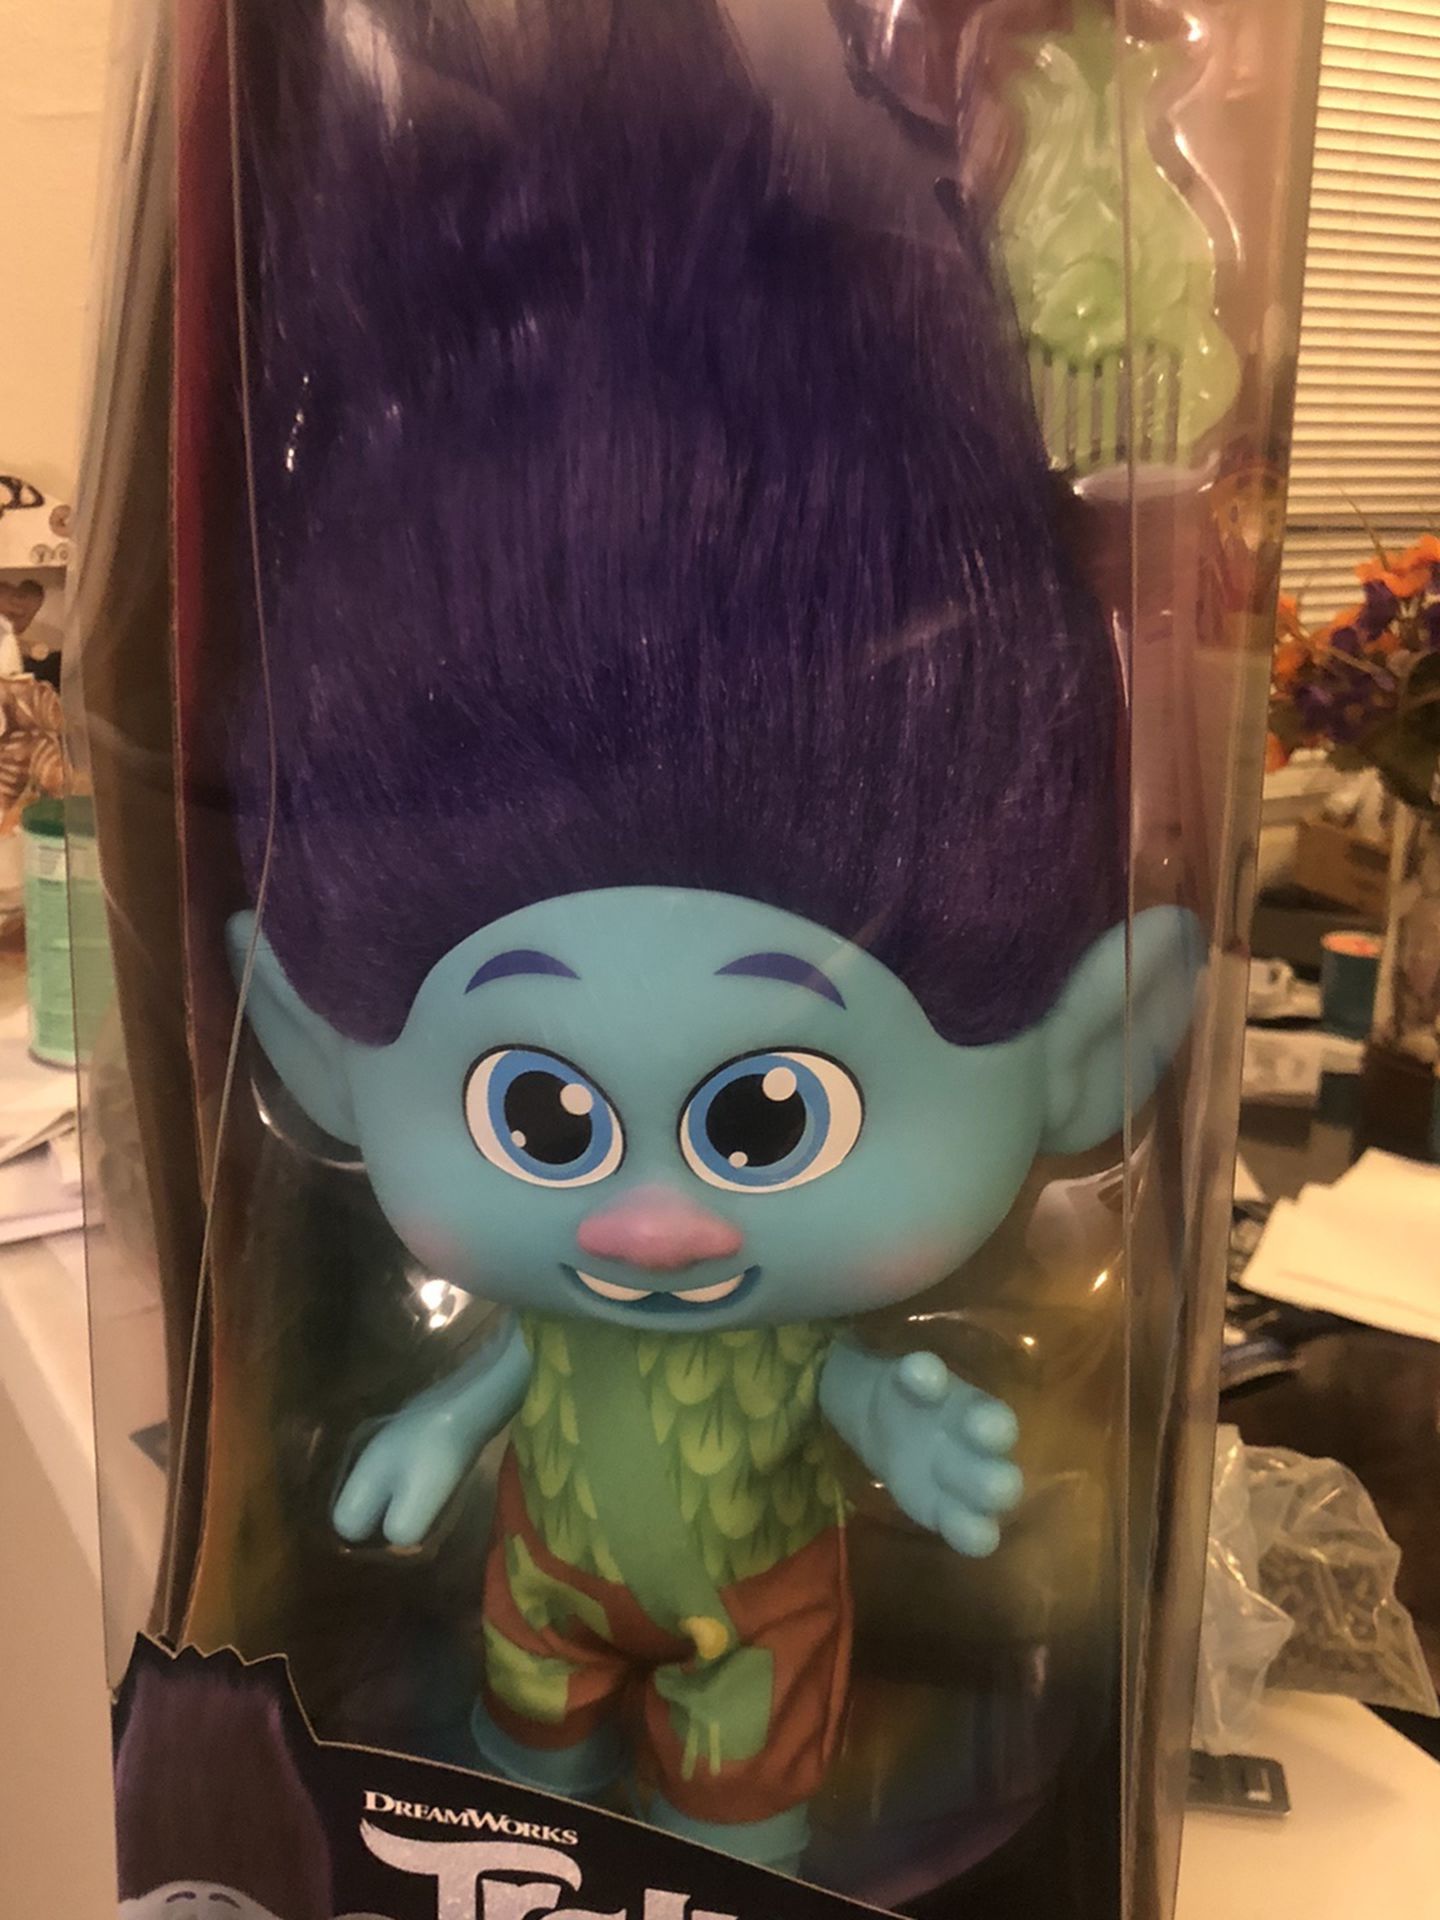 DreamWorks Trolls World Tour Toddler Branch, Removable Outfit, Comb